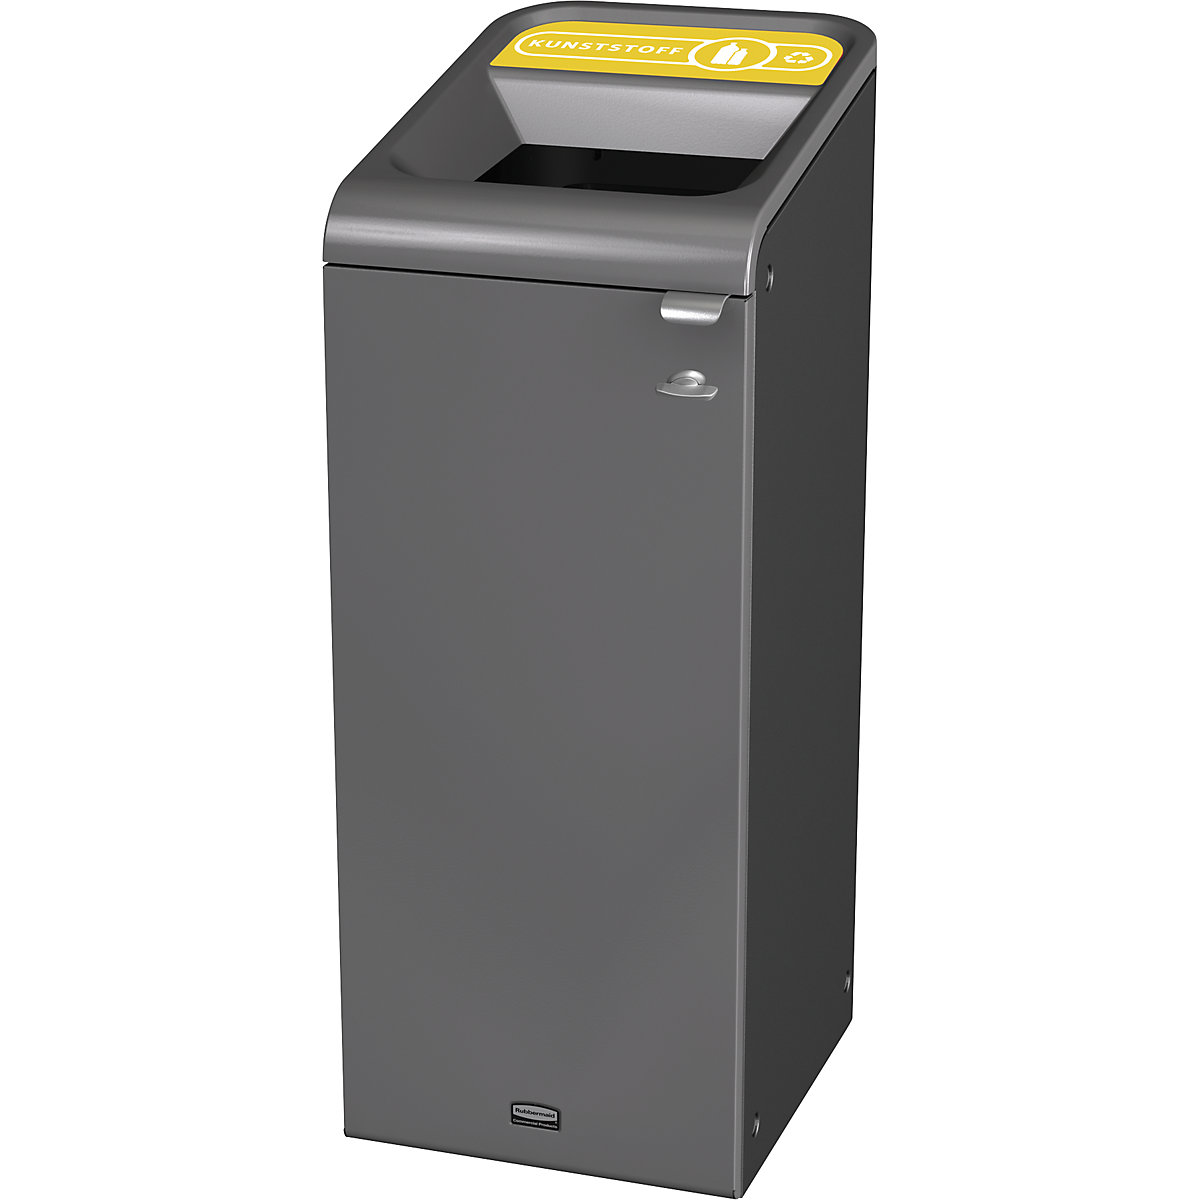 Configure™ recyclable waste collector – Rubbermaid